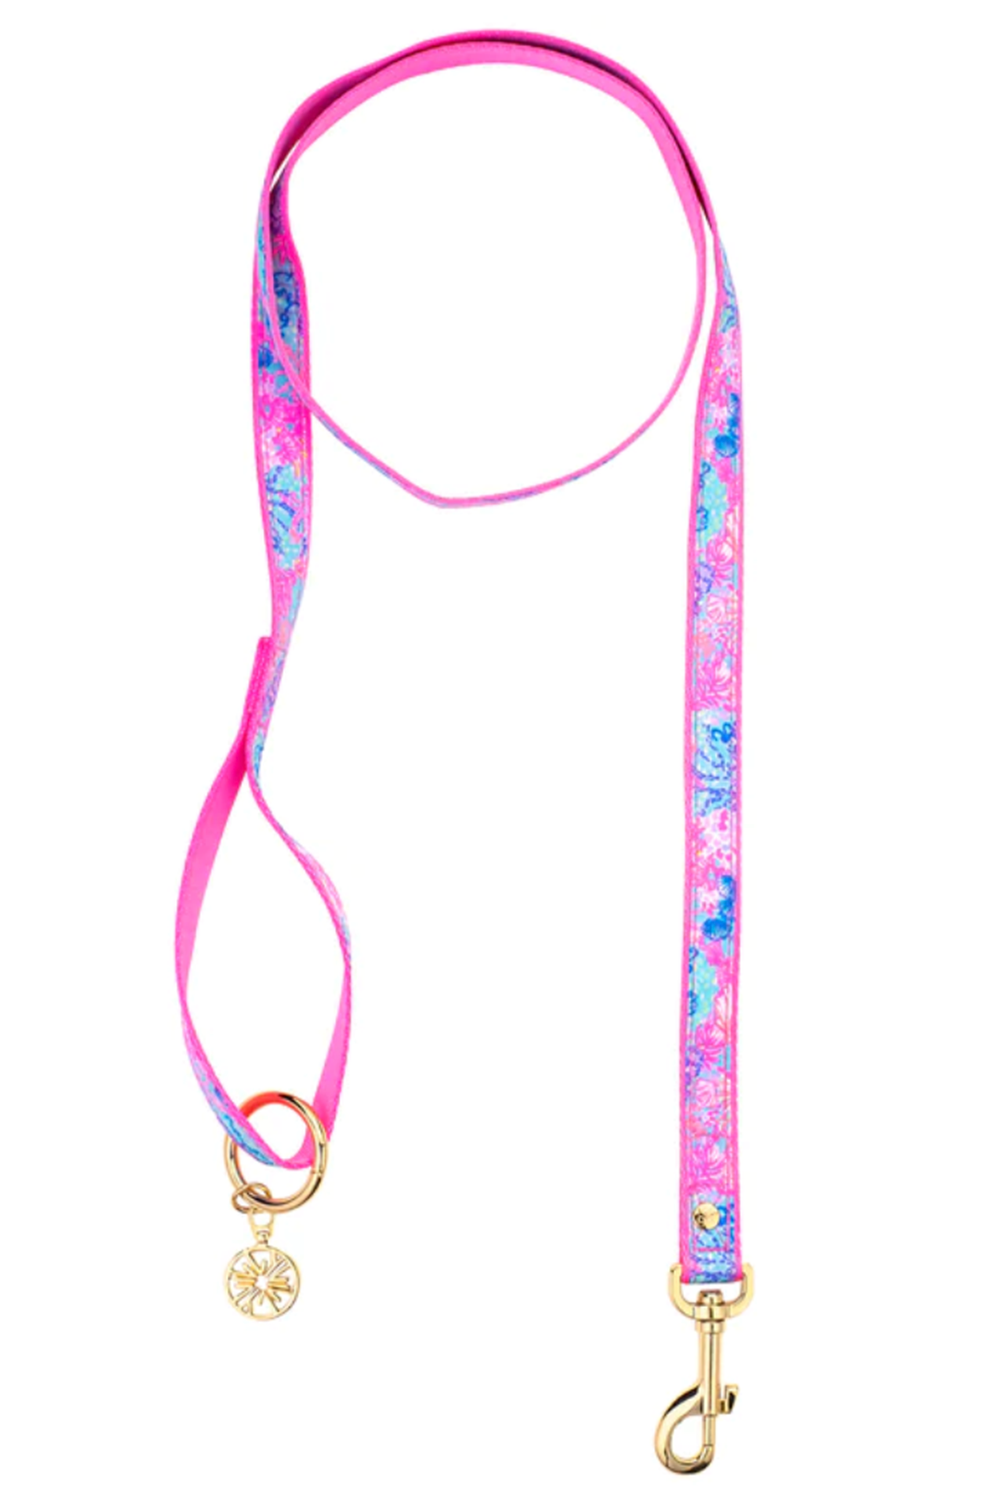 Lilly Pulitzer Dog Lead - Splendor in the Sand